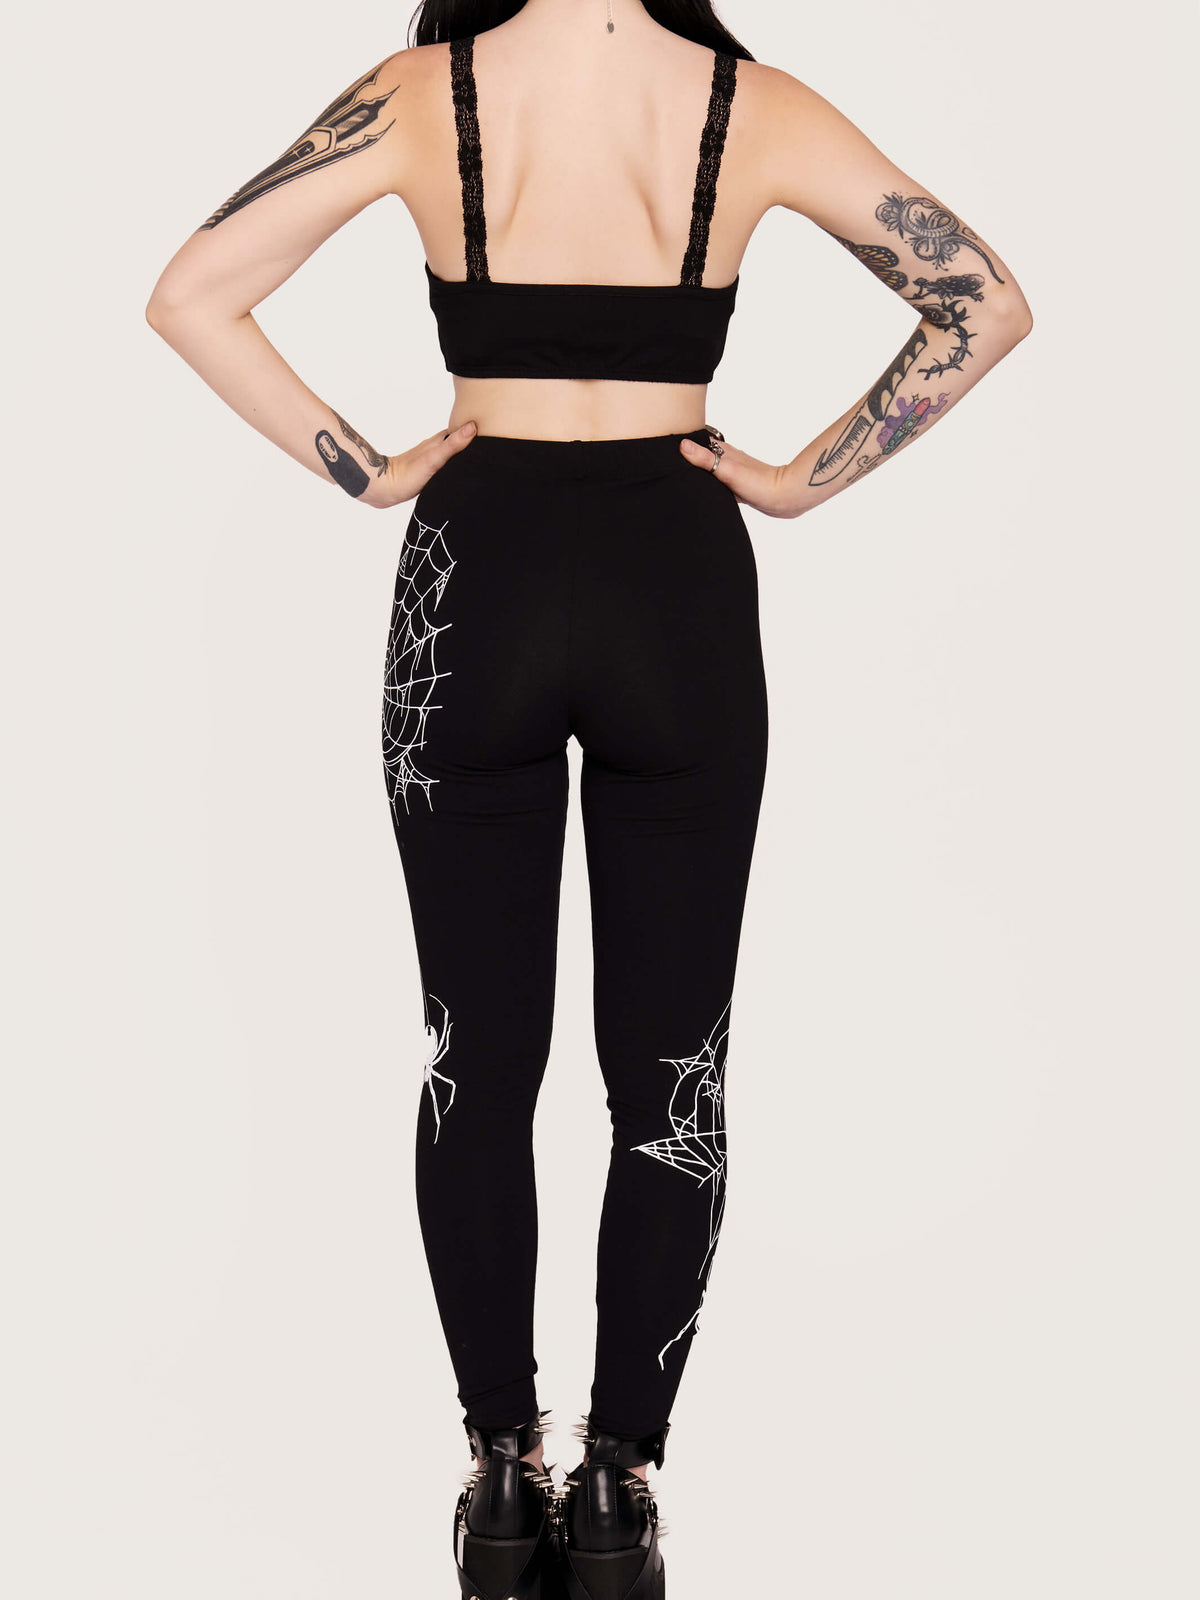 Spiderweb leggings. super soft and stretchy with elastic pull on waistband. Moon phases, witch symbols, constellations. nu goth fashion, goth legging, goth grunge fashion, dark aesthetic clothing. Goth fashion, alt girl fashion, goth clothing, witchy clothing, egirl fashion, dark aesthetic.